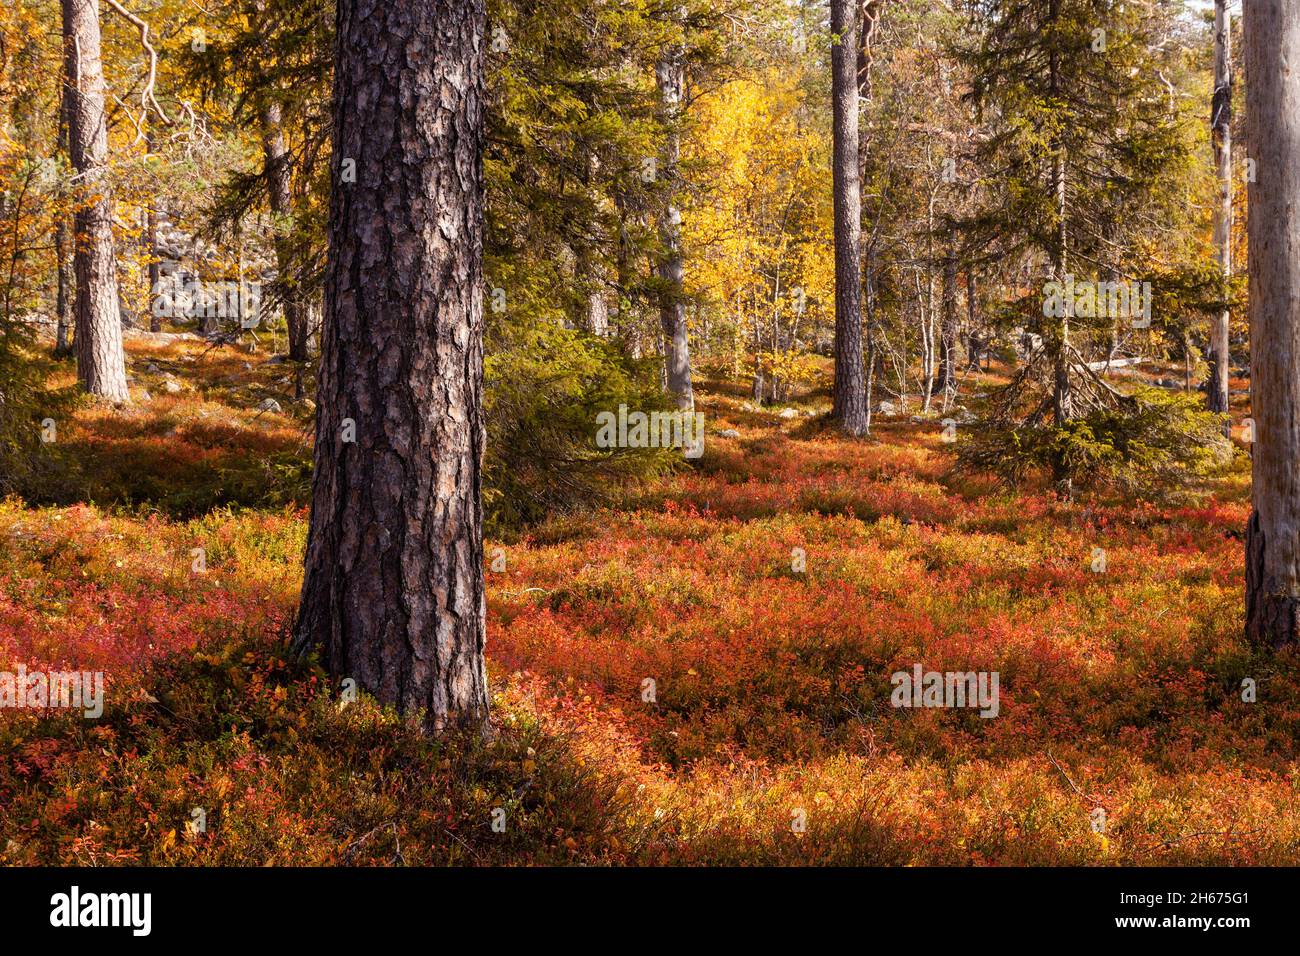 An autumnal old-growth taiga forest with warm and colorful forest floor during fall foliage in Northern Finland near Salla. Stock Photo